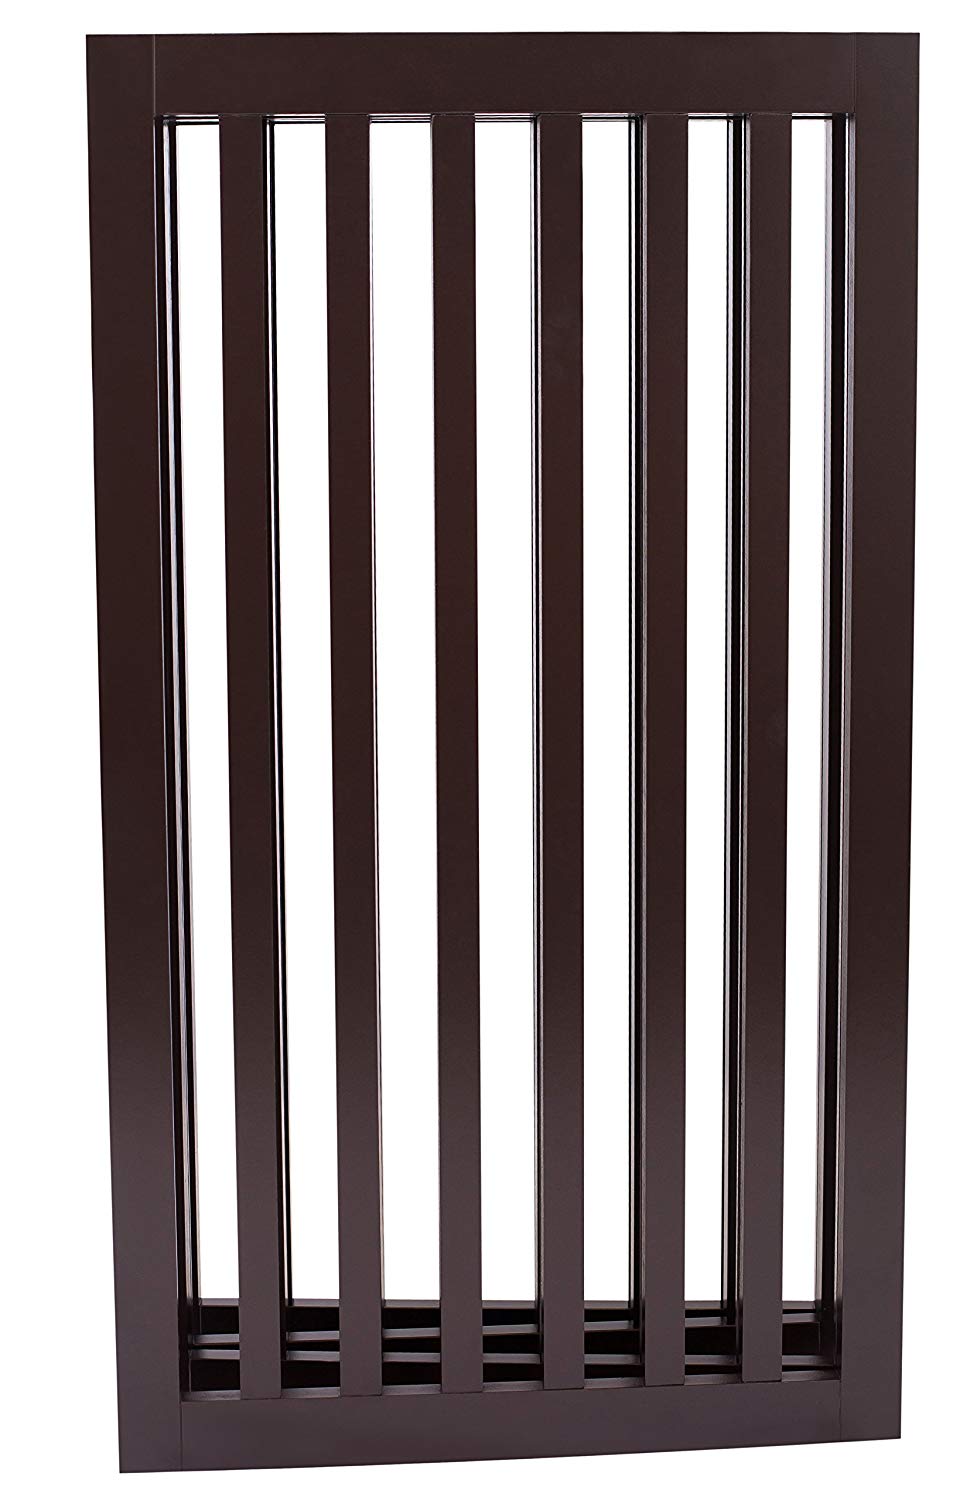 Internet's Best Traditional Pet Gate - 4 Panel - 36" Tall - Espresso - image 2 of 7